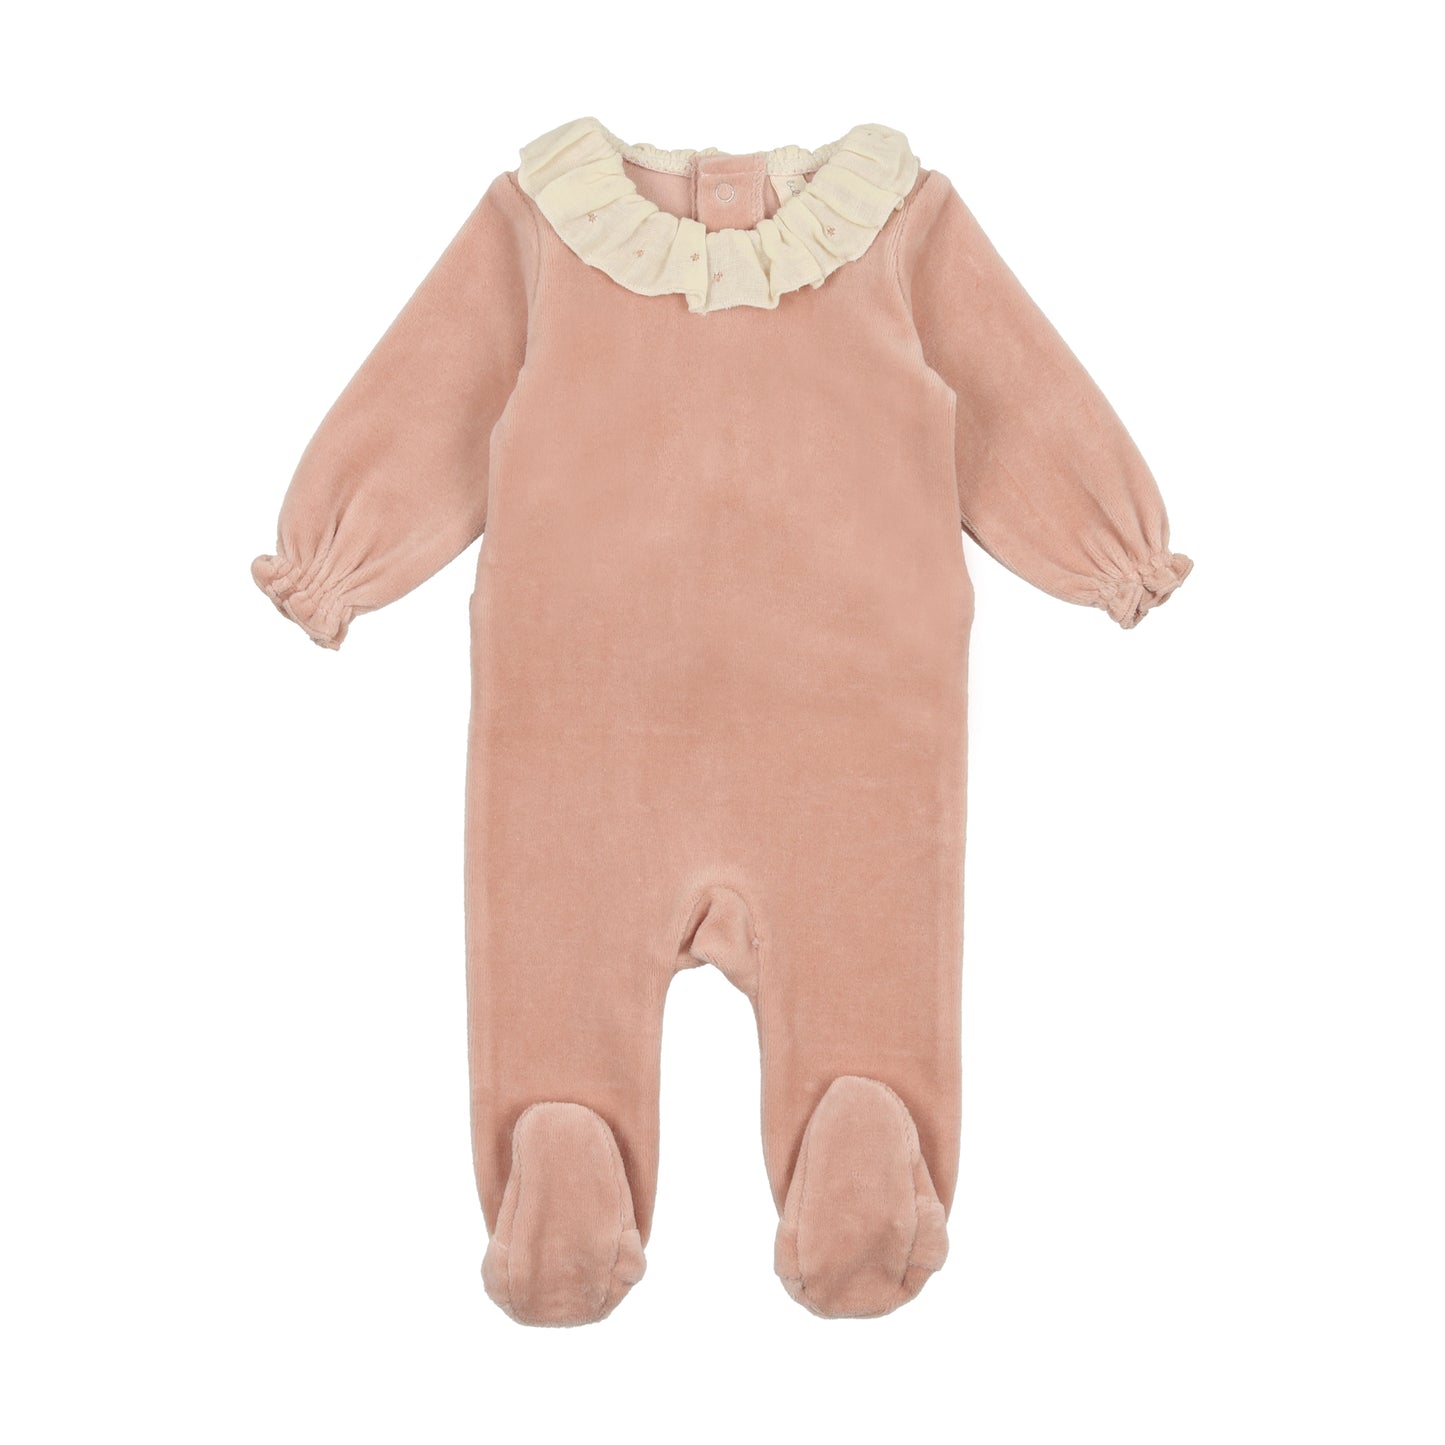 Lil Legs Velour Ruffle Footie Collection